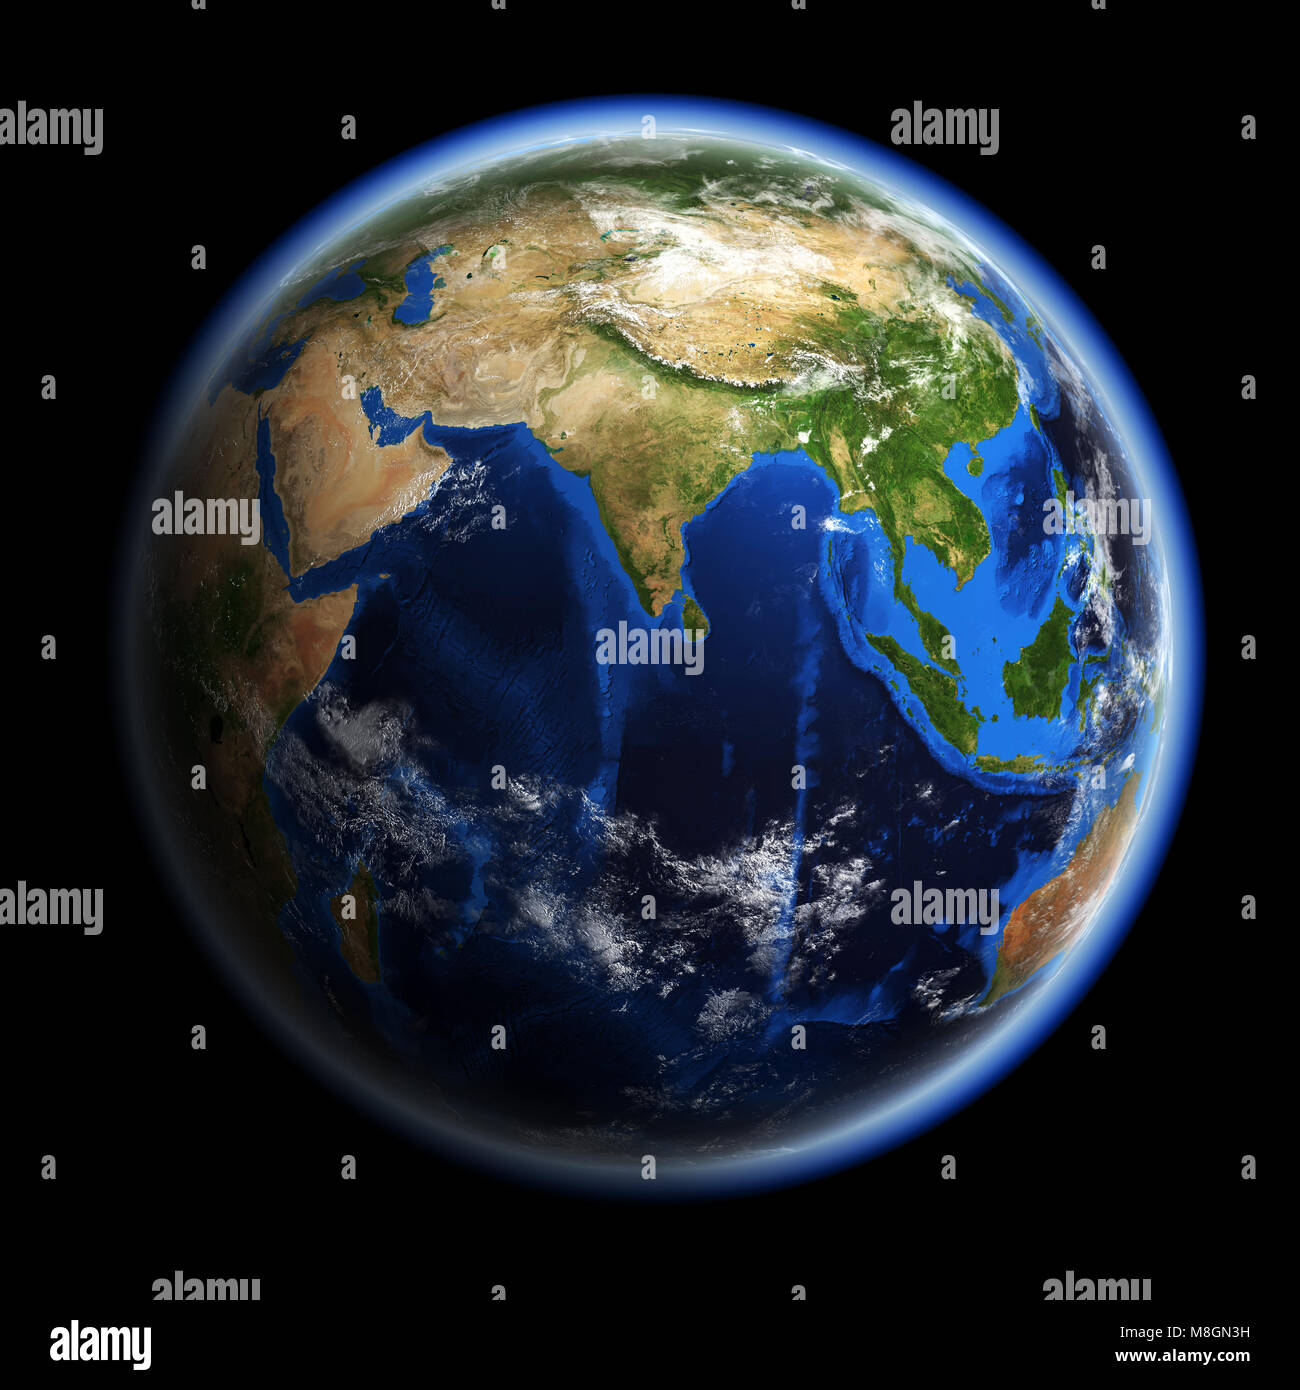 Planet Earth 3d rendering Stock Photo